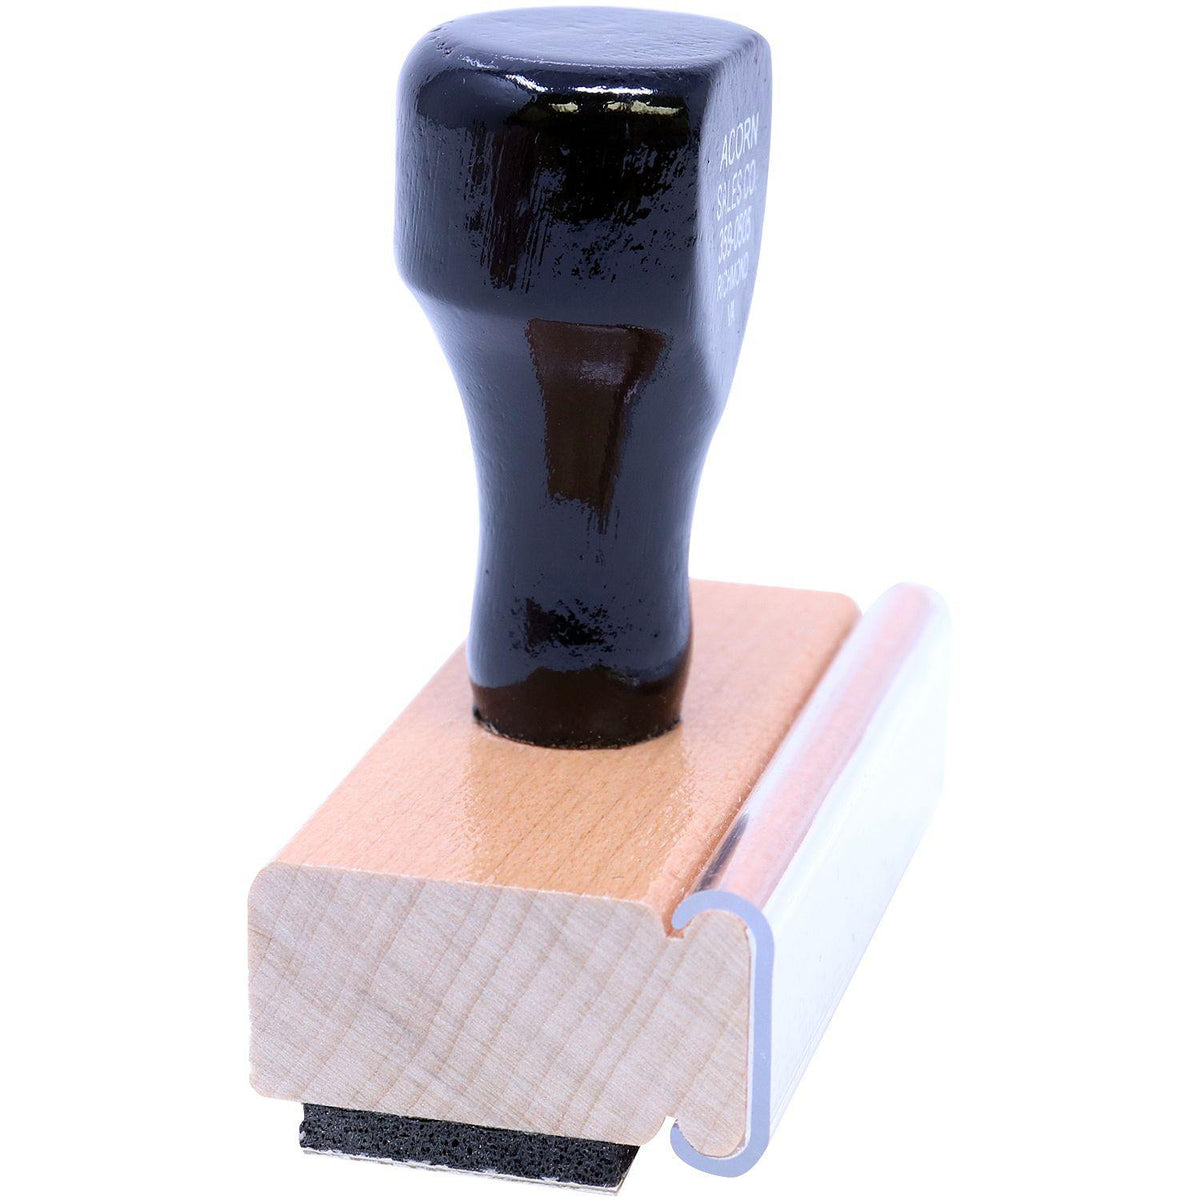 Side View of Large Installment Loan Rubber Stamp at an Angle